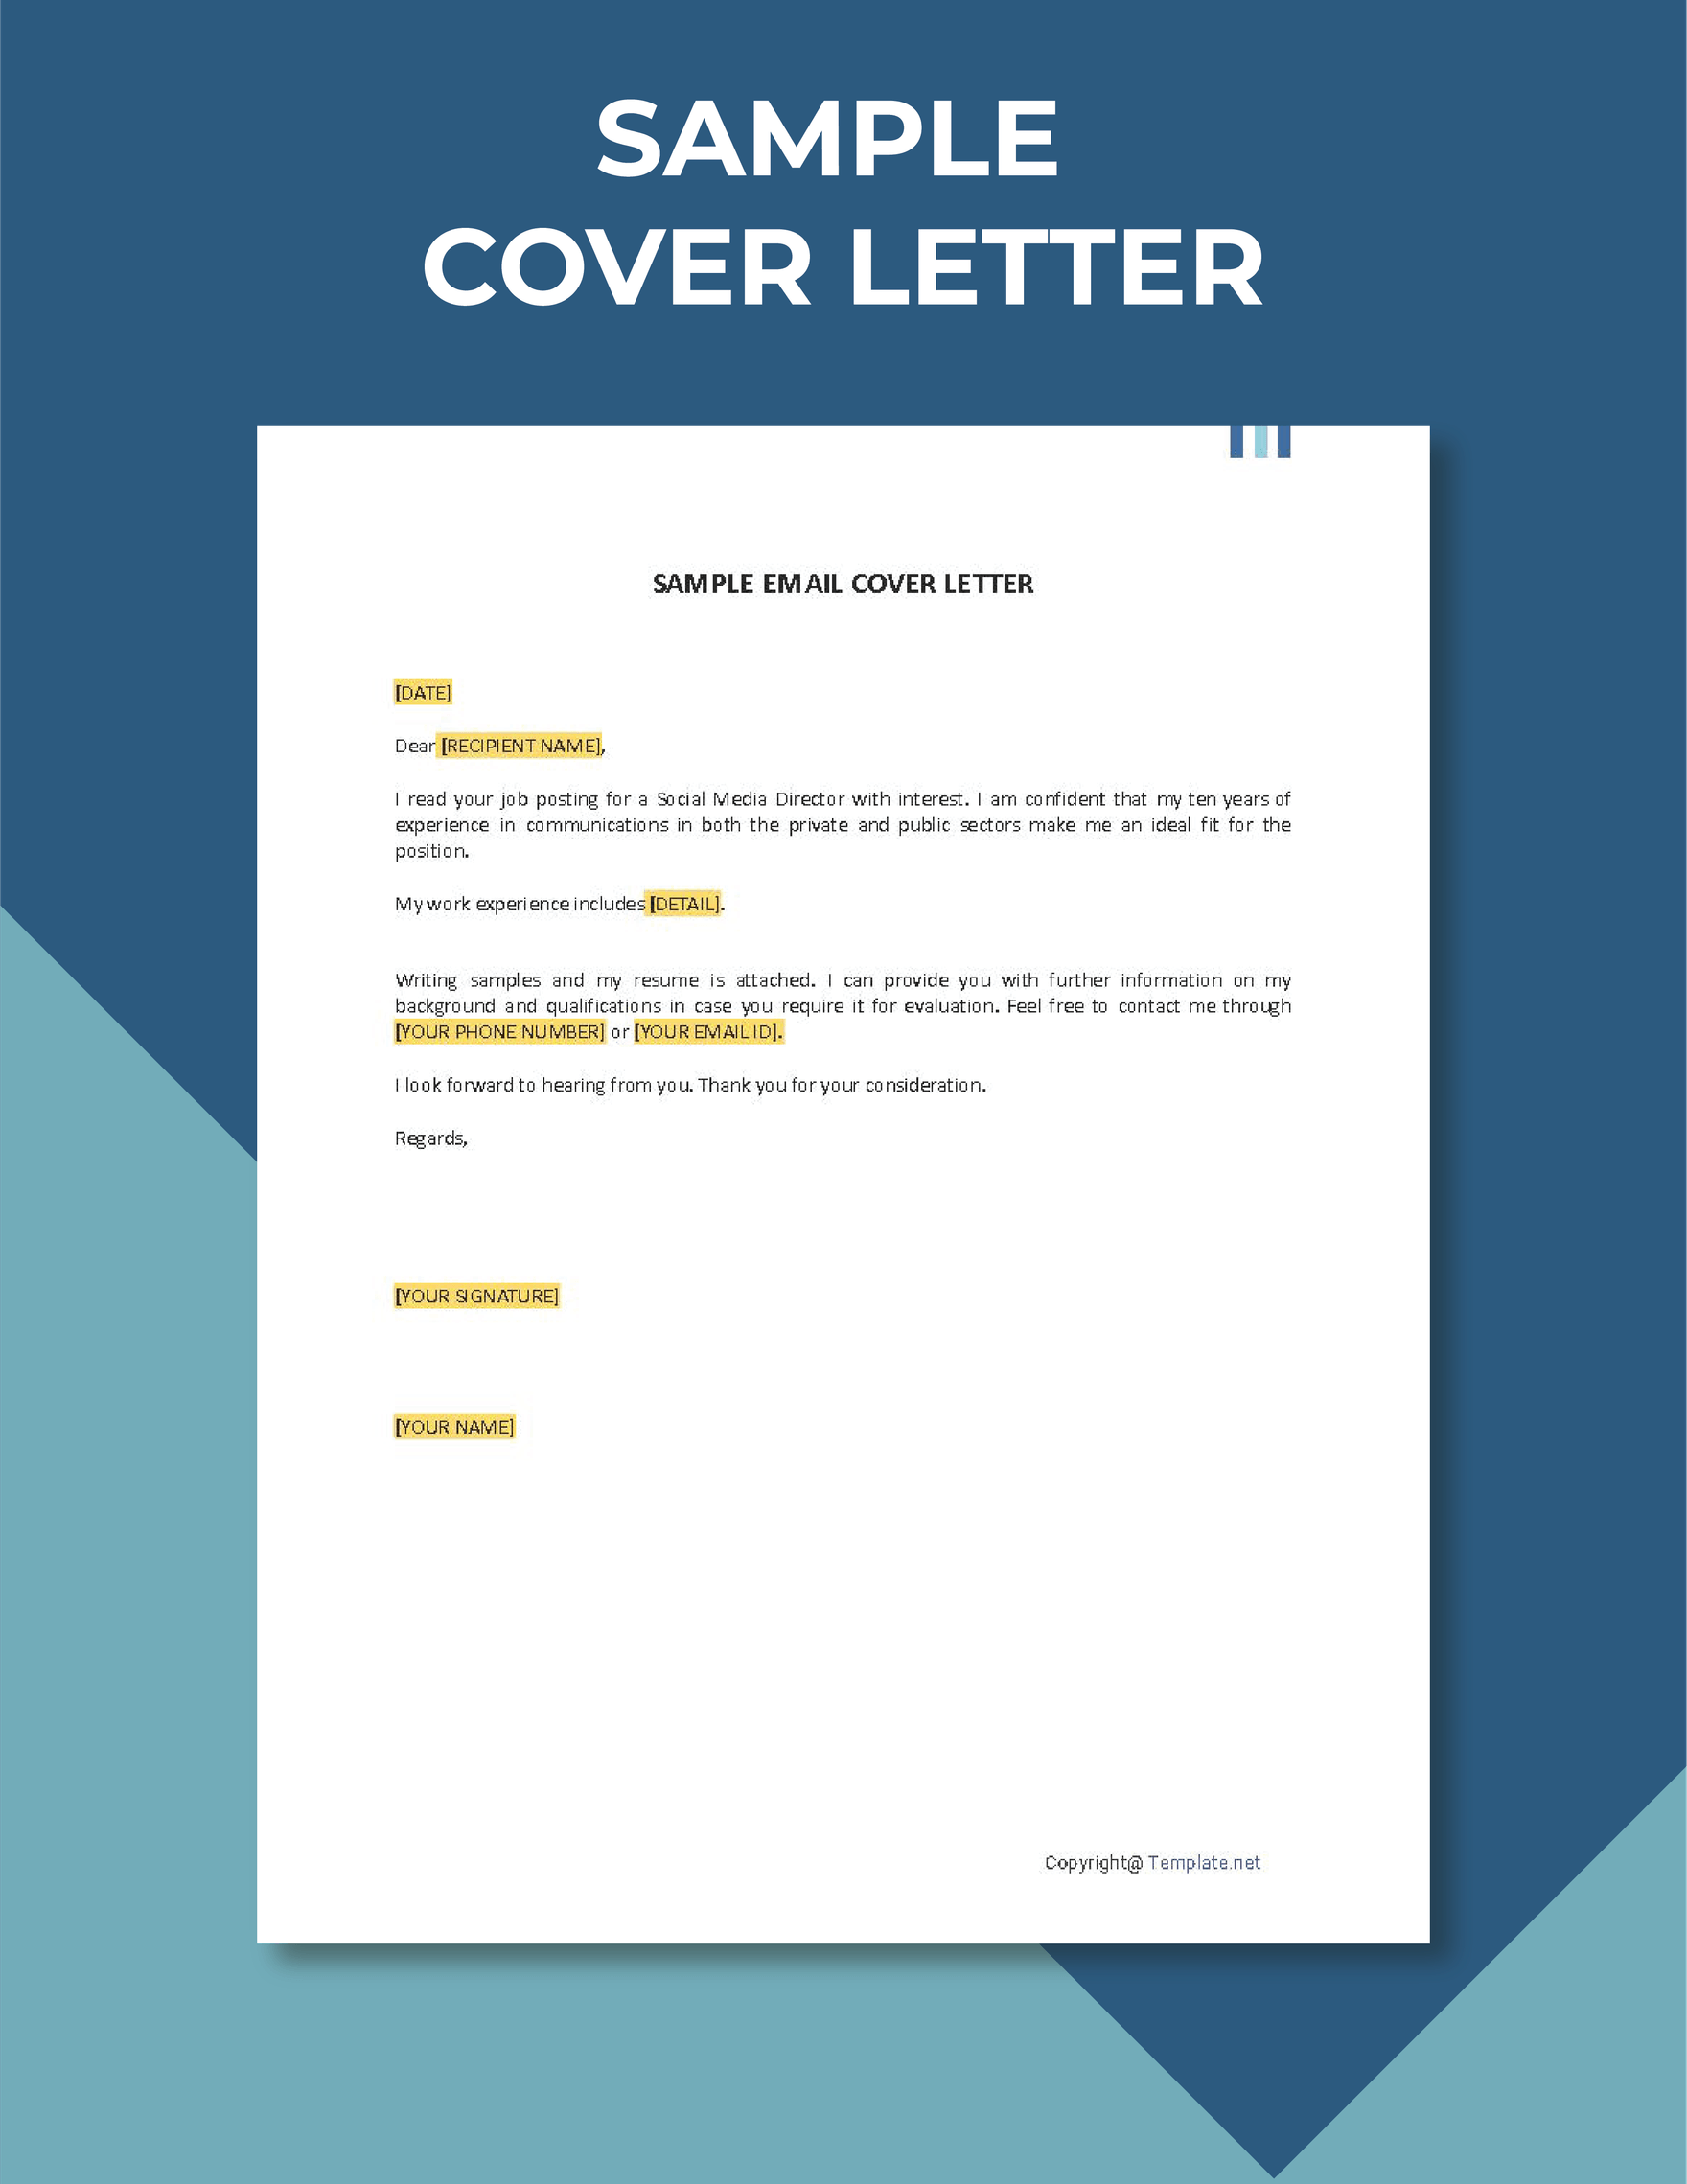 Free Sample Email Cover Letter in Word, Google Docs, PDF, Apple Pages, Outlook